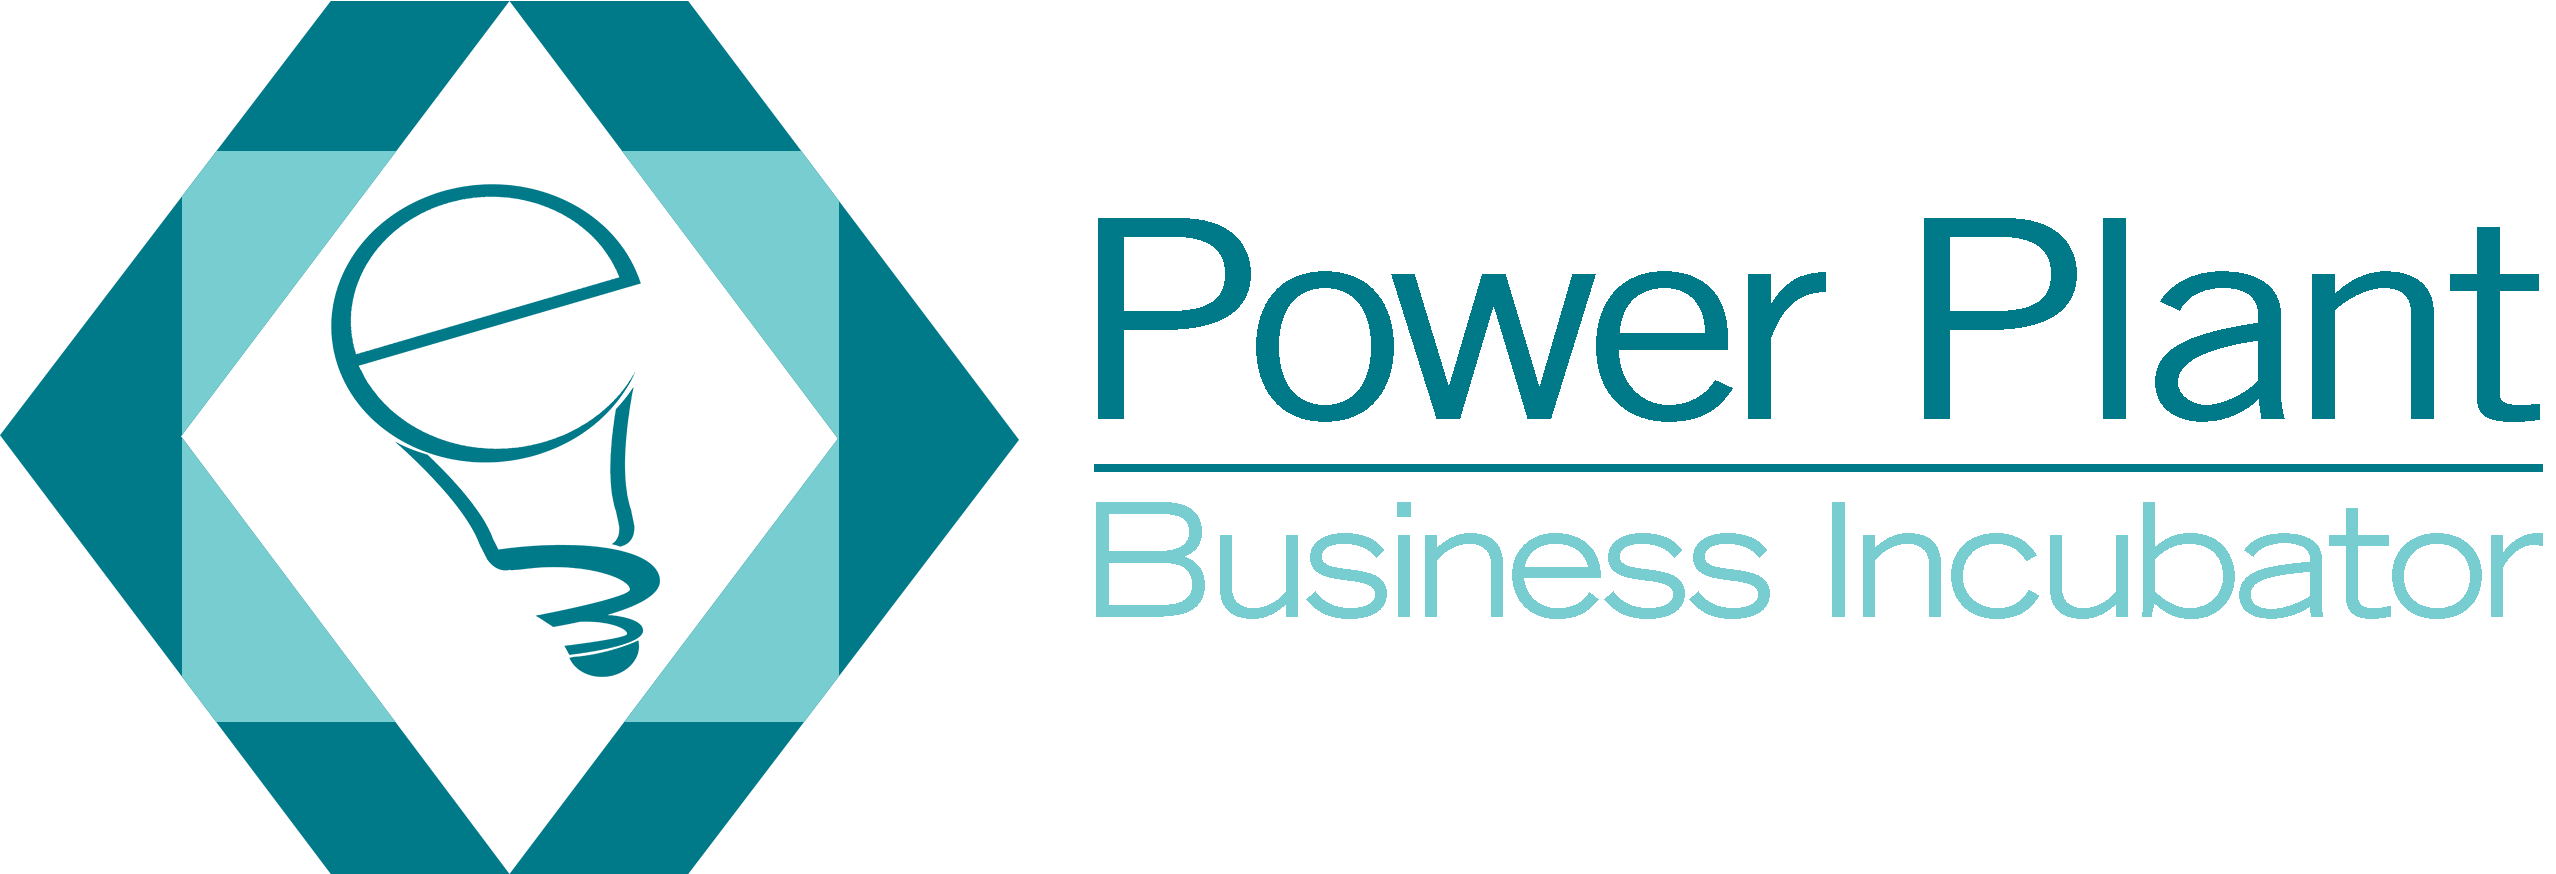 The logo for Power Plant Business Incubator